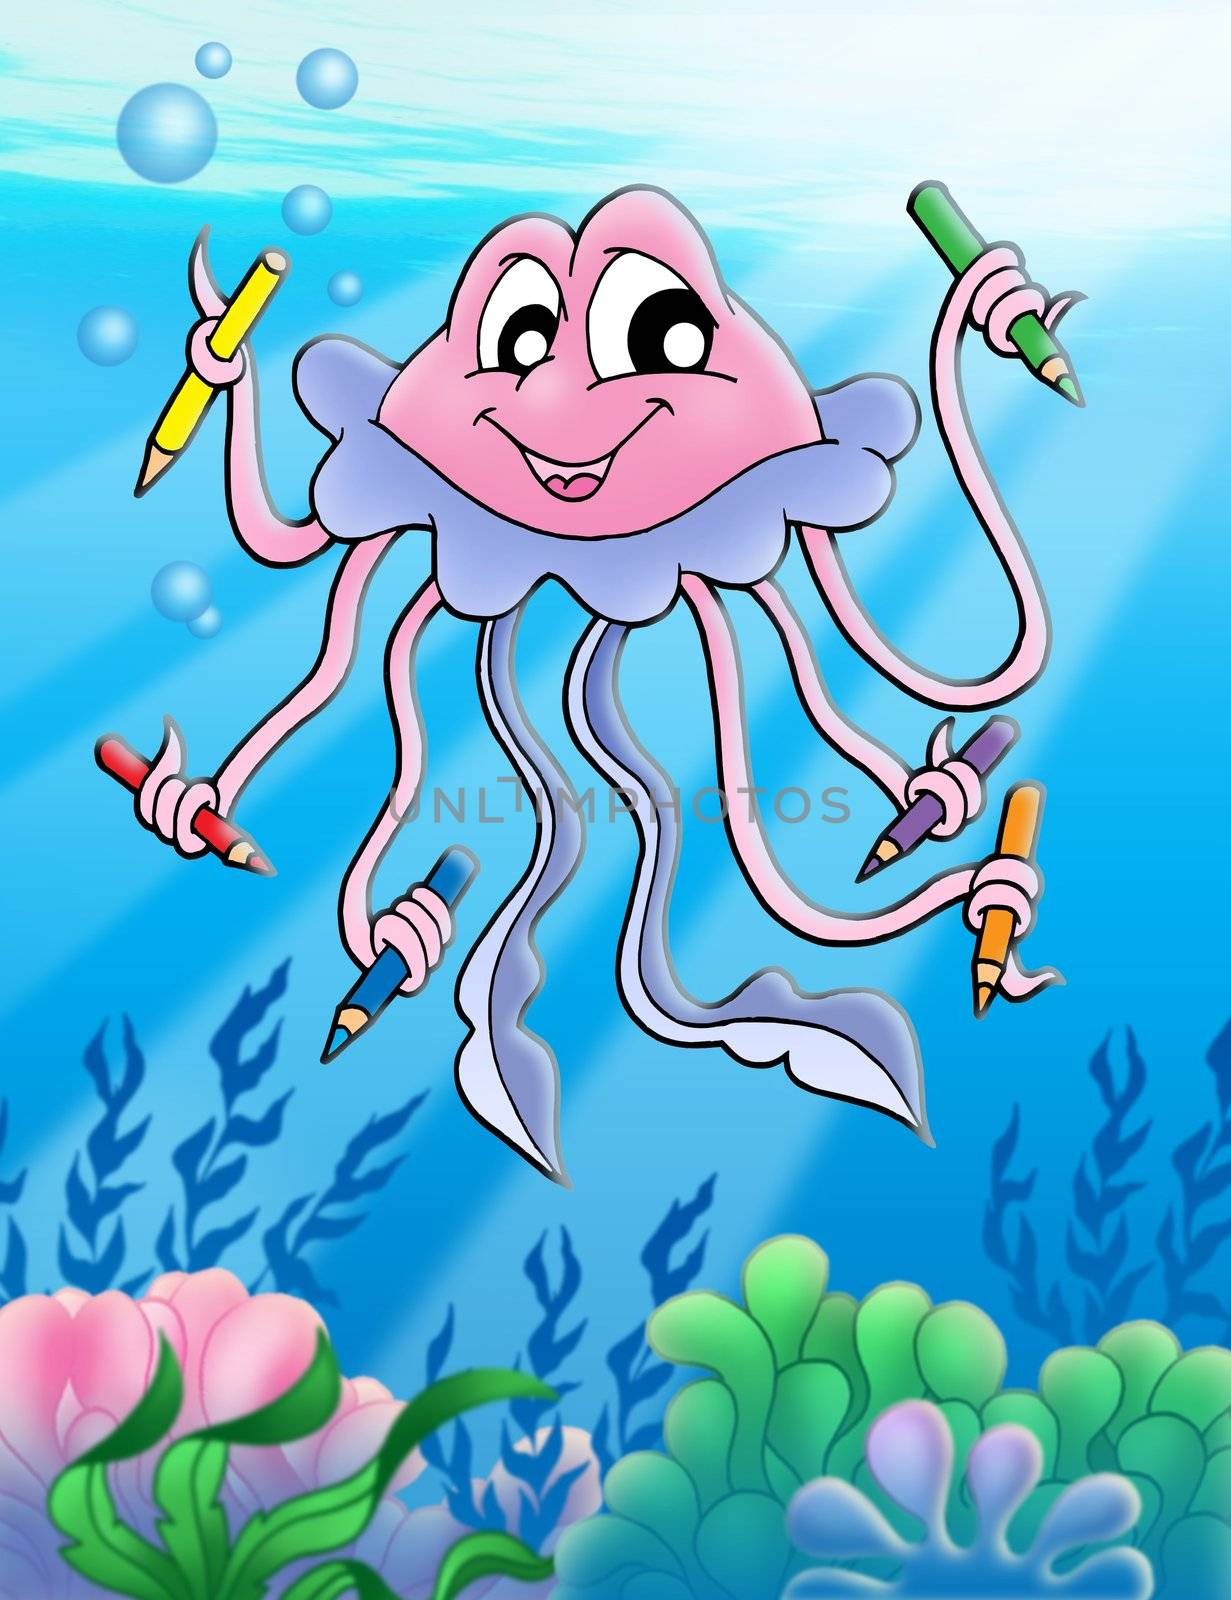 Jellyfish with crayons and bubbles - color illustration.